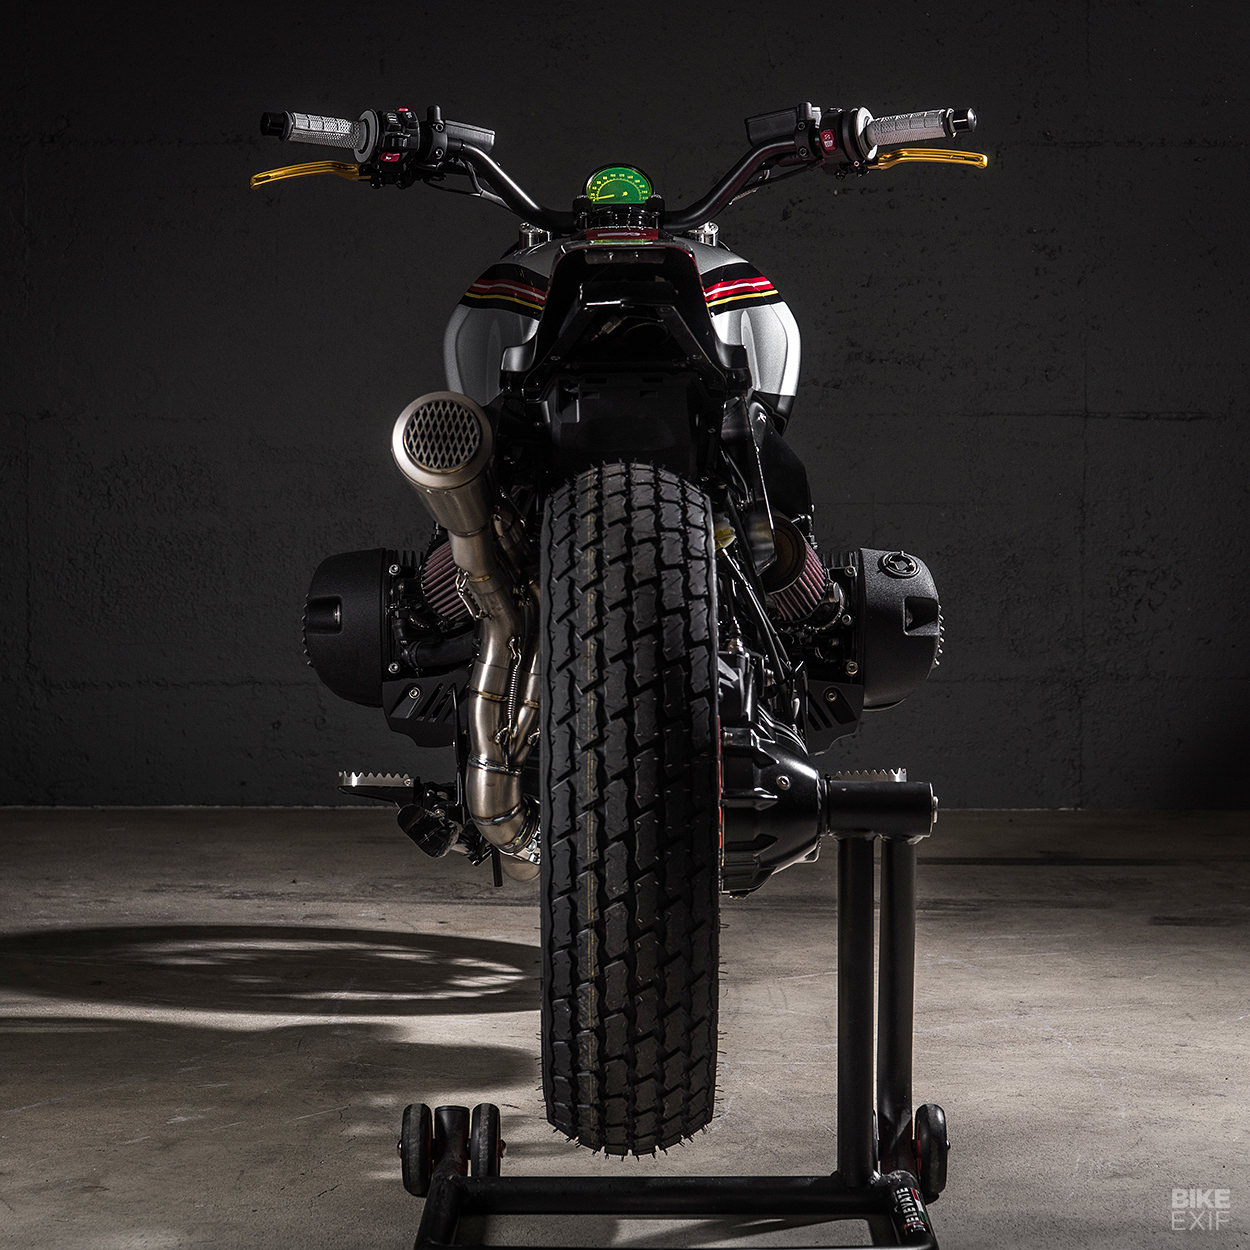 A BMW R nineT street tracker motorcycle from VTR Customs